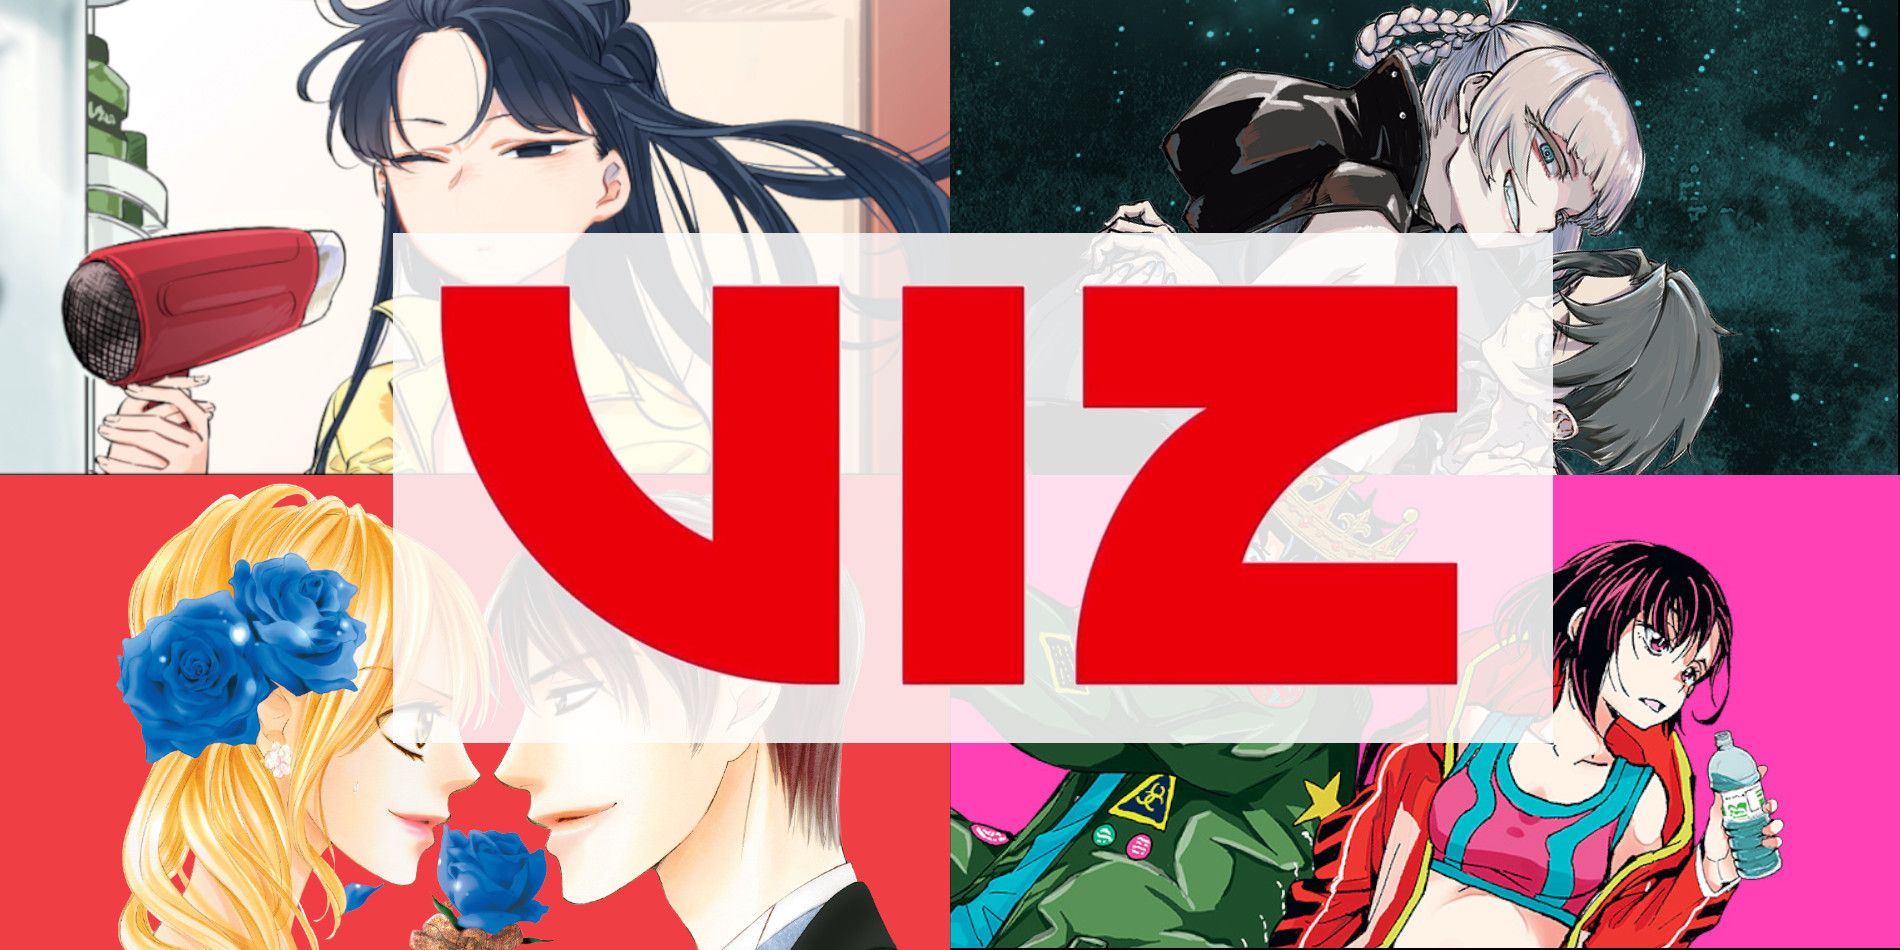 Viz Media Makes Multiple Anime Series Available For Free Viewing